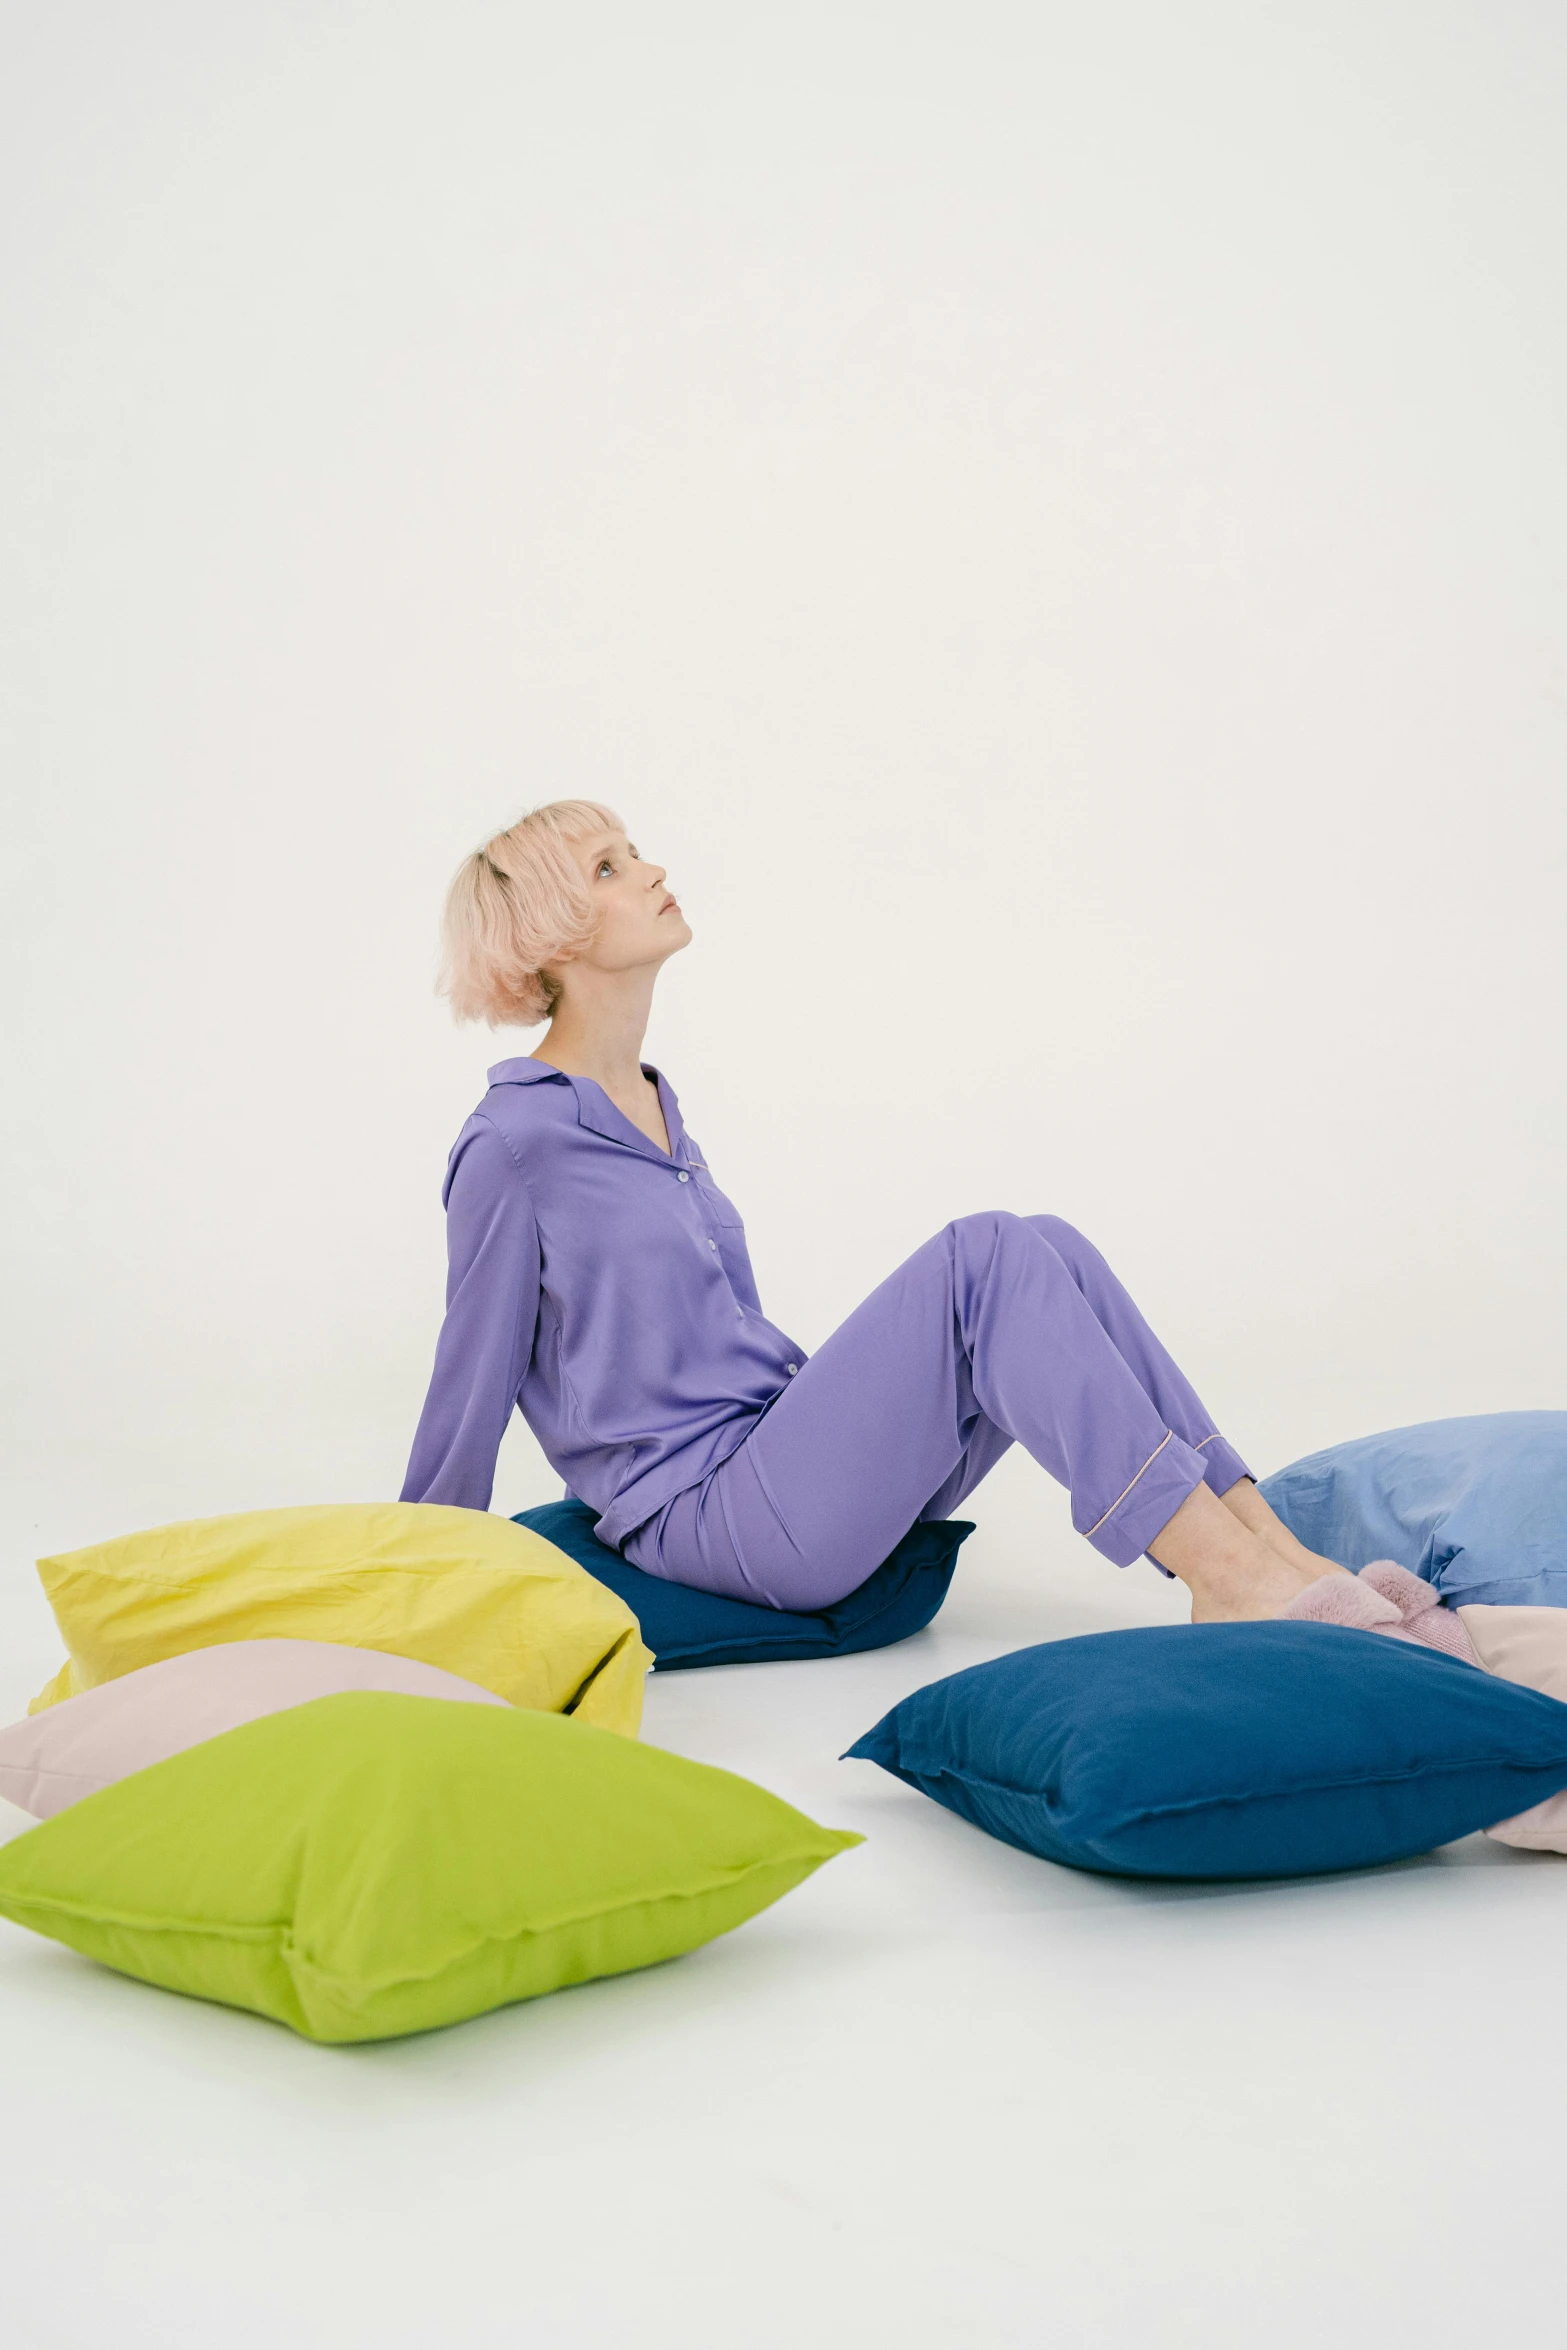 there is a woman sitting on the ground wearing different colored pillows